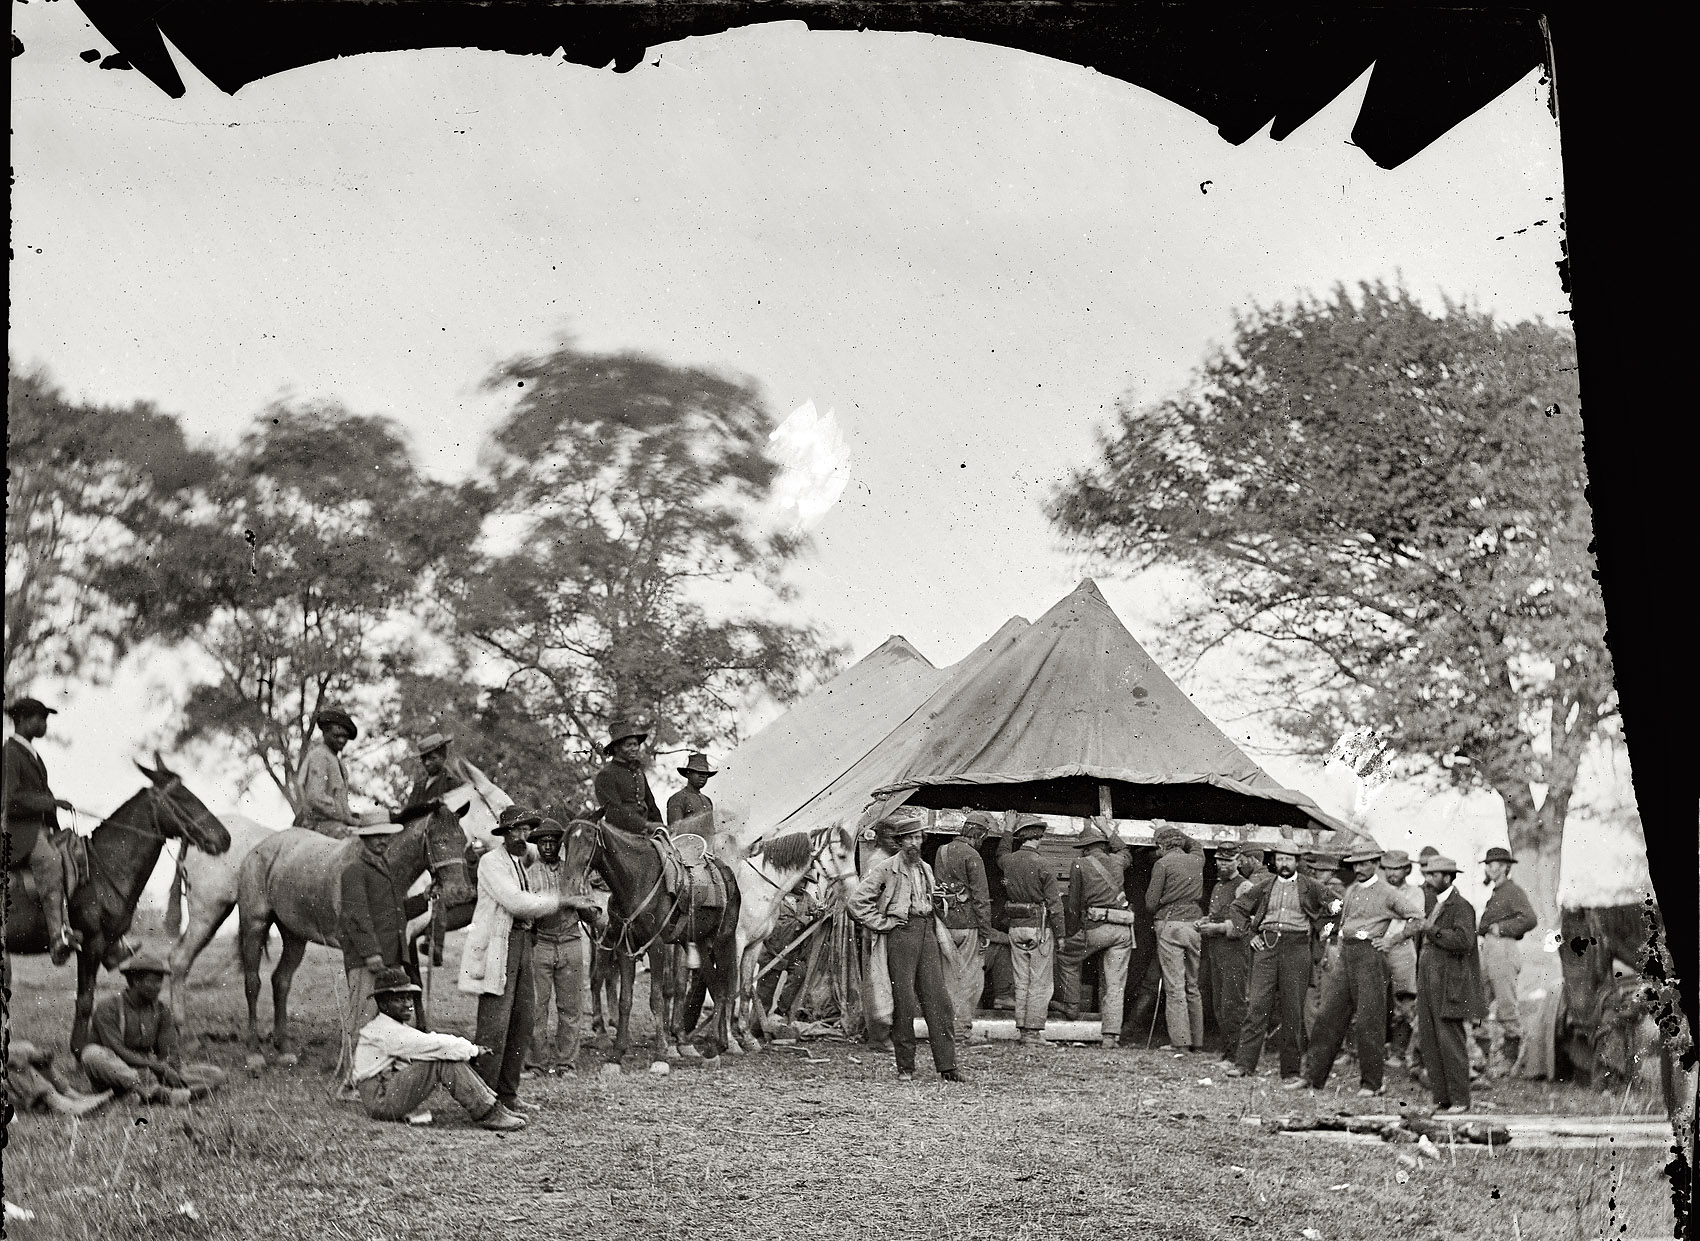 May 1864. "Fredericksburg, Va. Soldiers filling canteens." Photographs from the main Eastern theater of war, Grant's Wilderness Campaign, May-June 1864. Wet plate glass negative, half of stereo pair, photographer unknown. View full size.